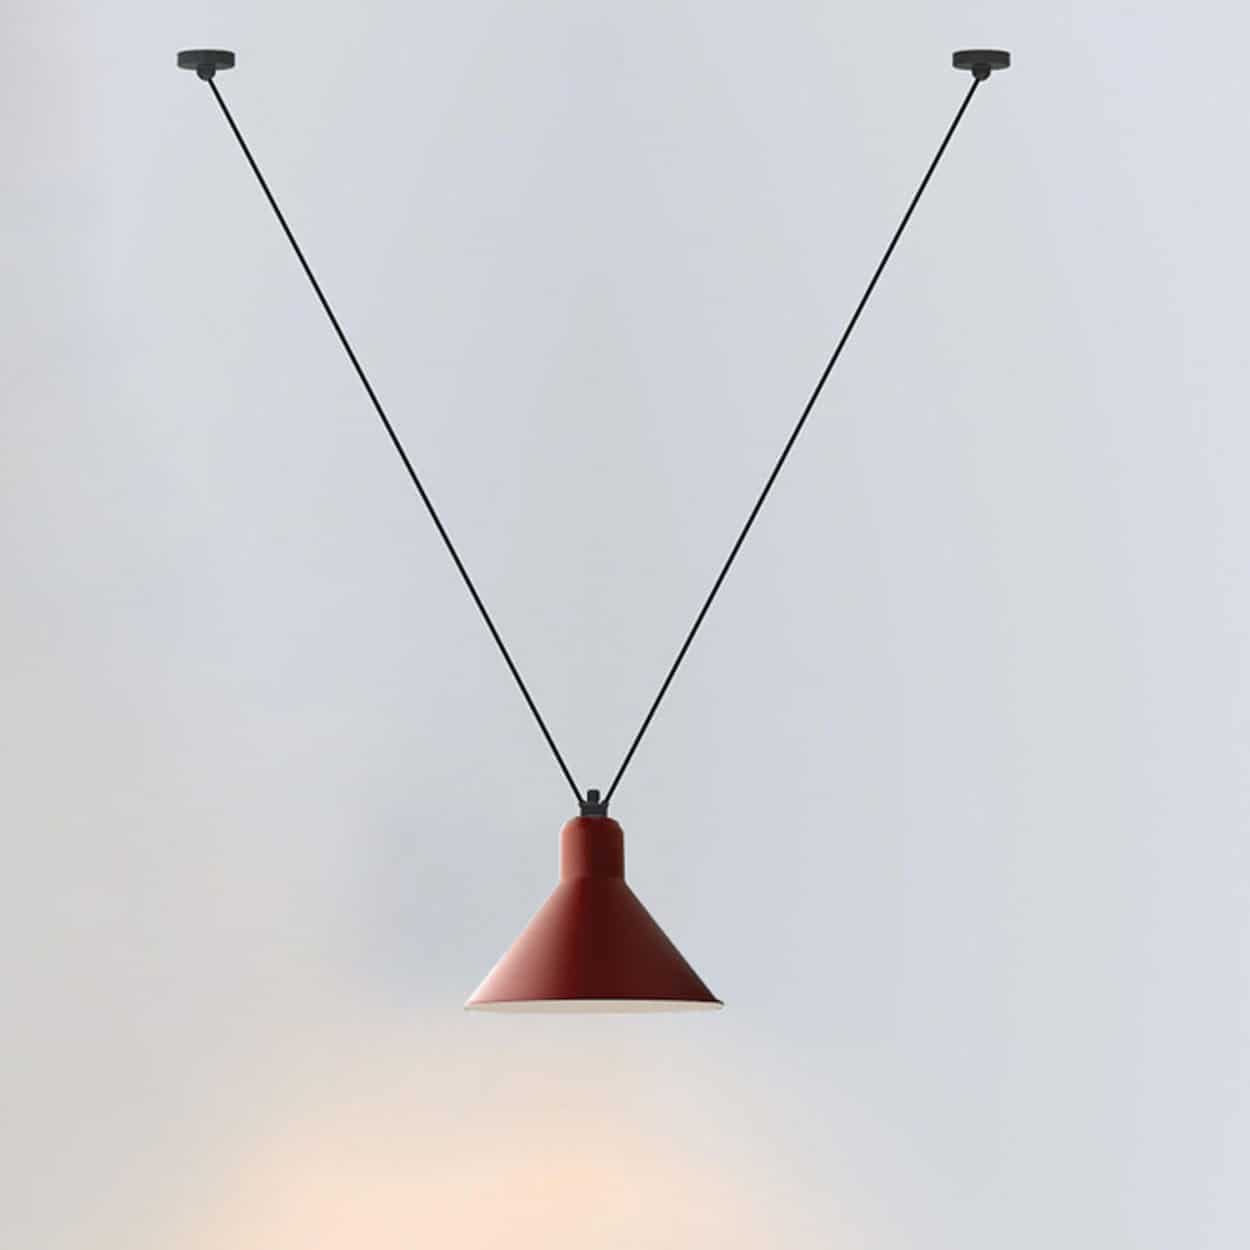 Foccasi V-Wires Funnel Shades Pendant Lamp